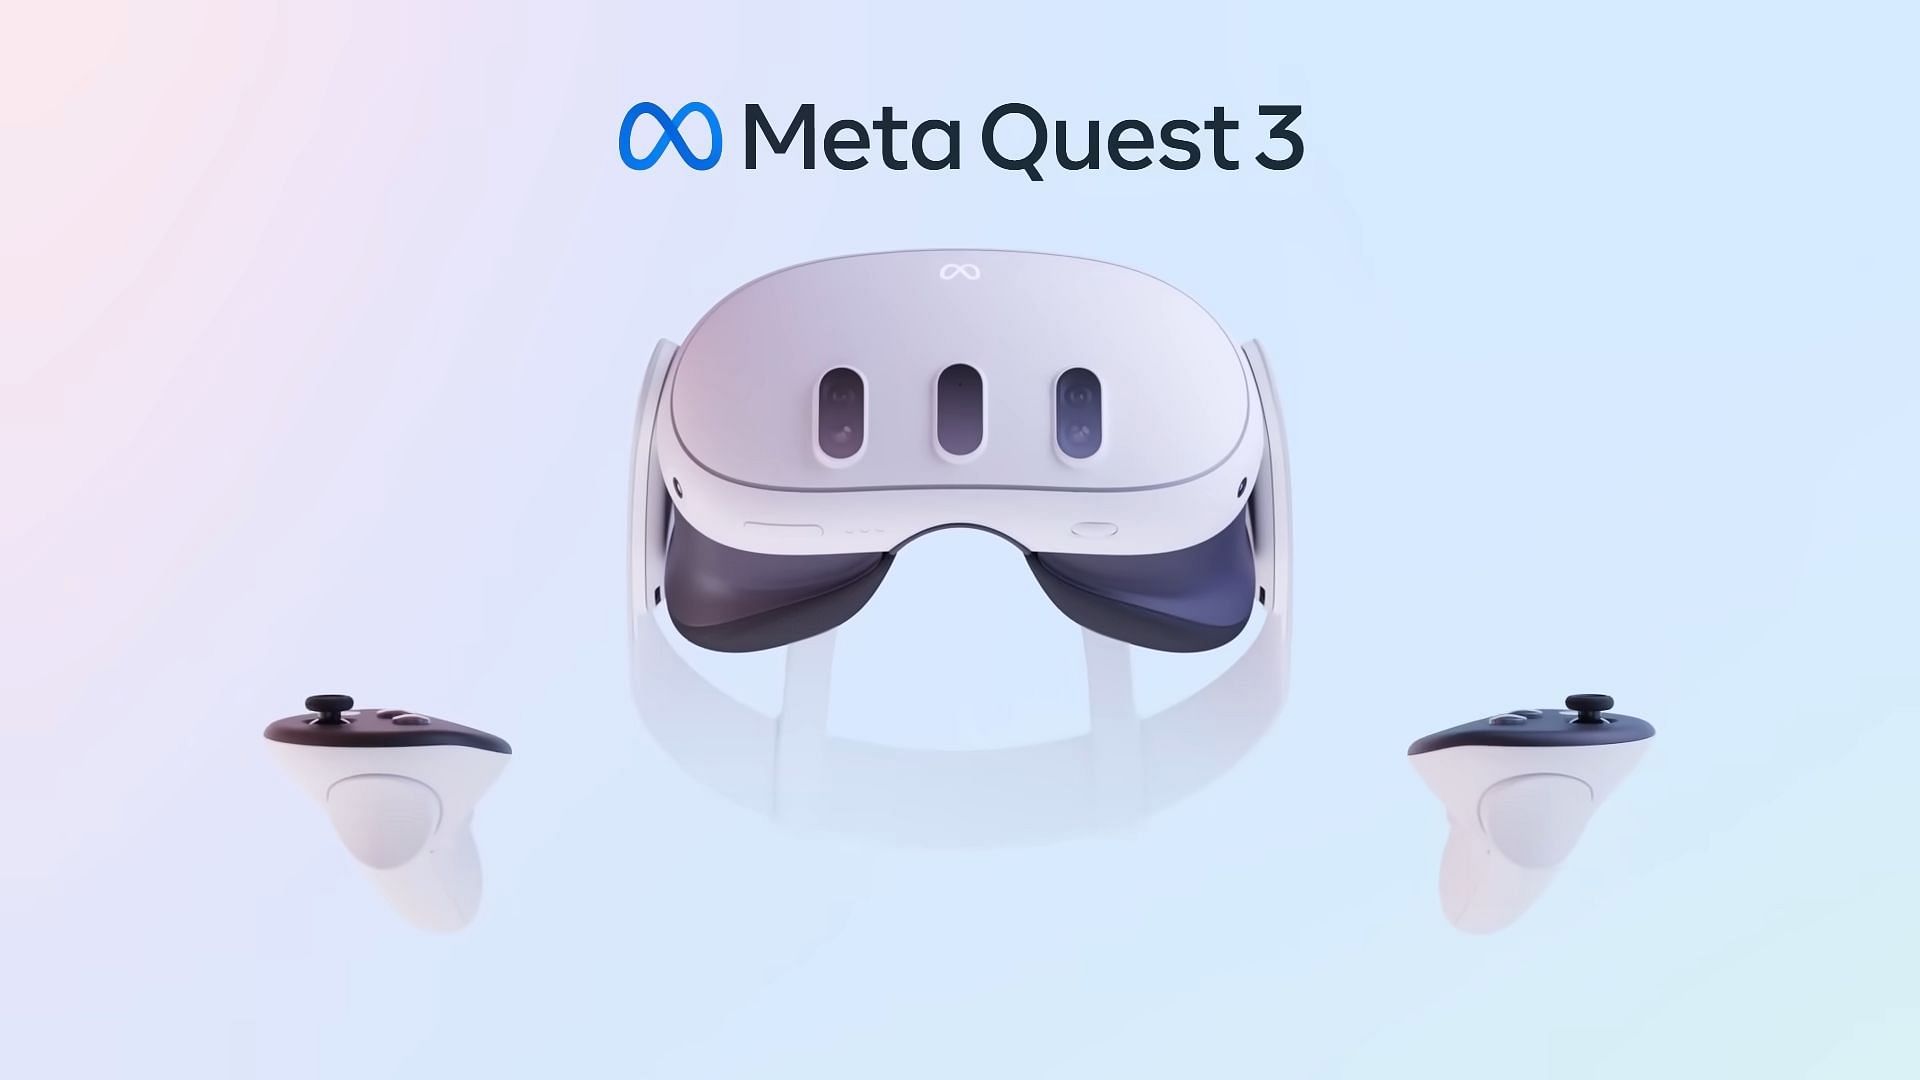 Meta Quest 2 VR headset is now an even better value with bundled $50   credit at $299